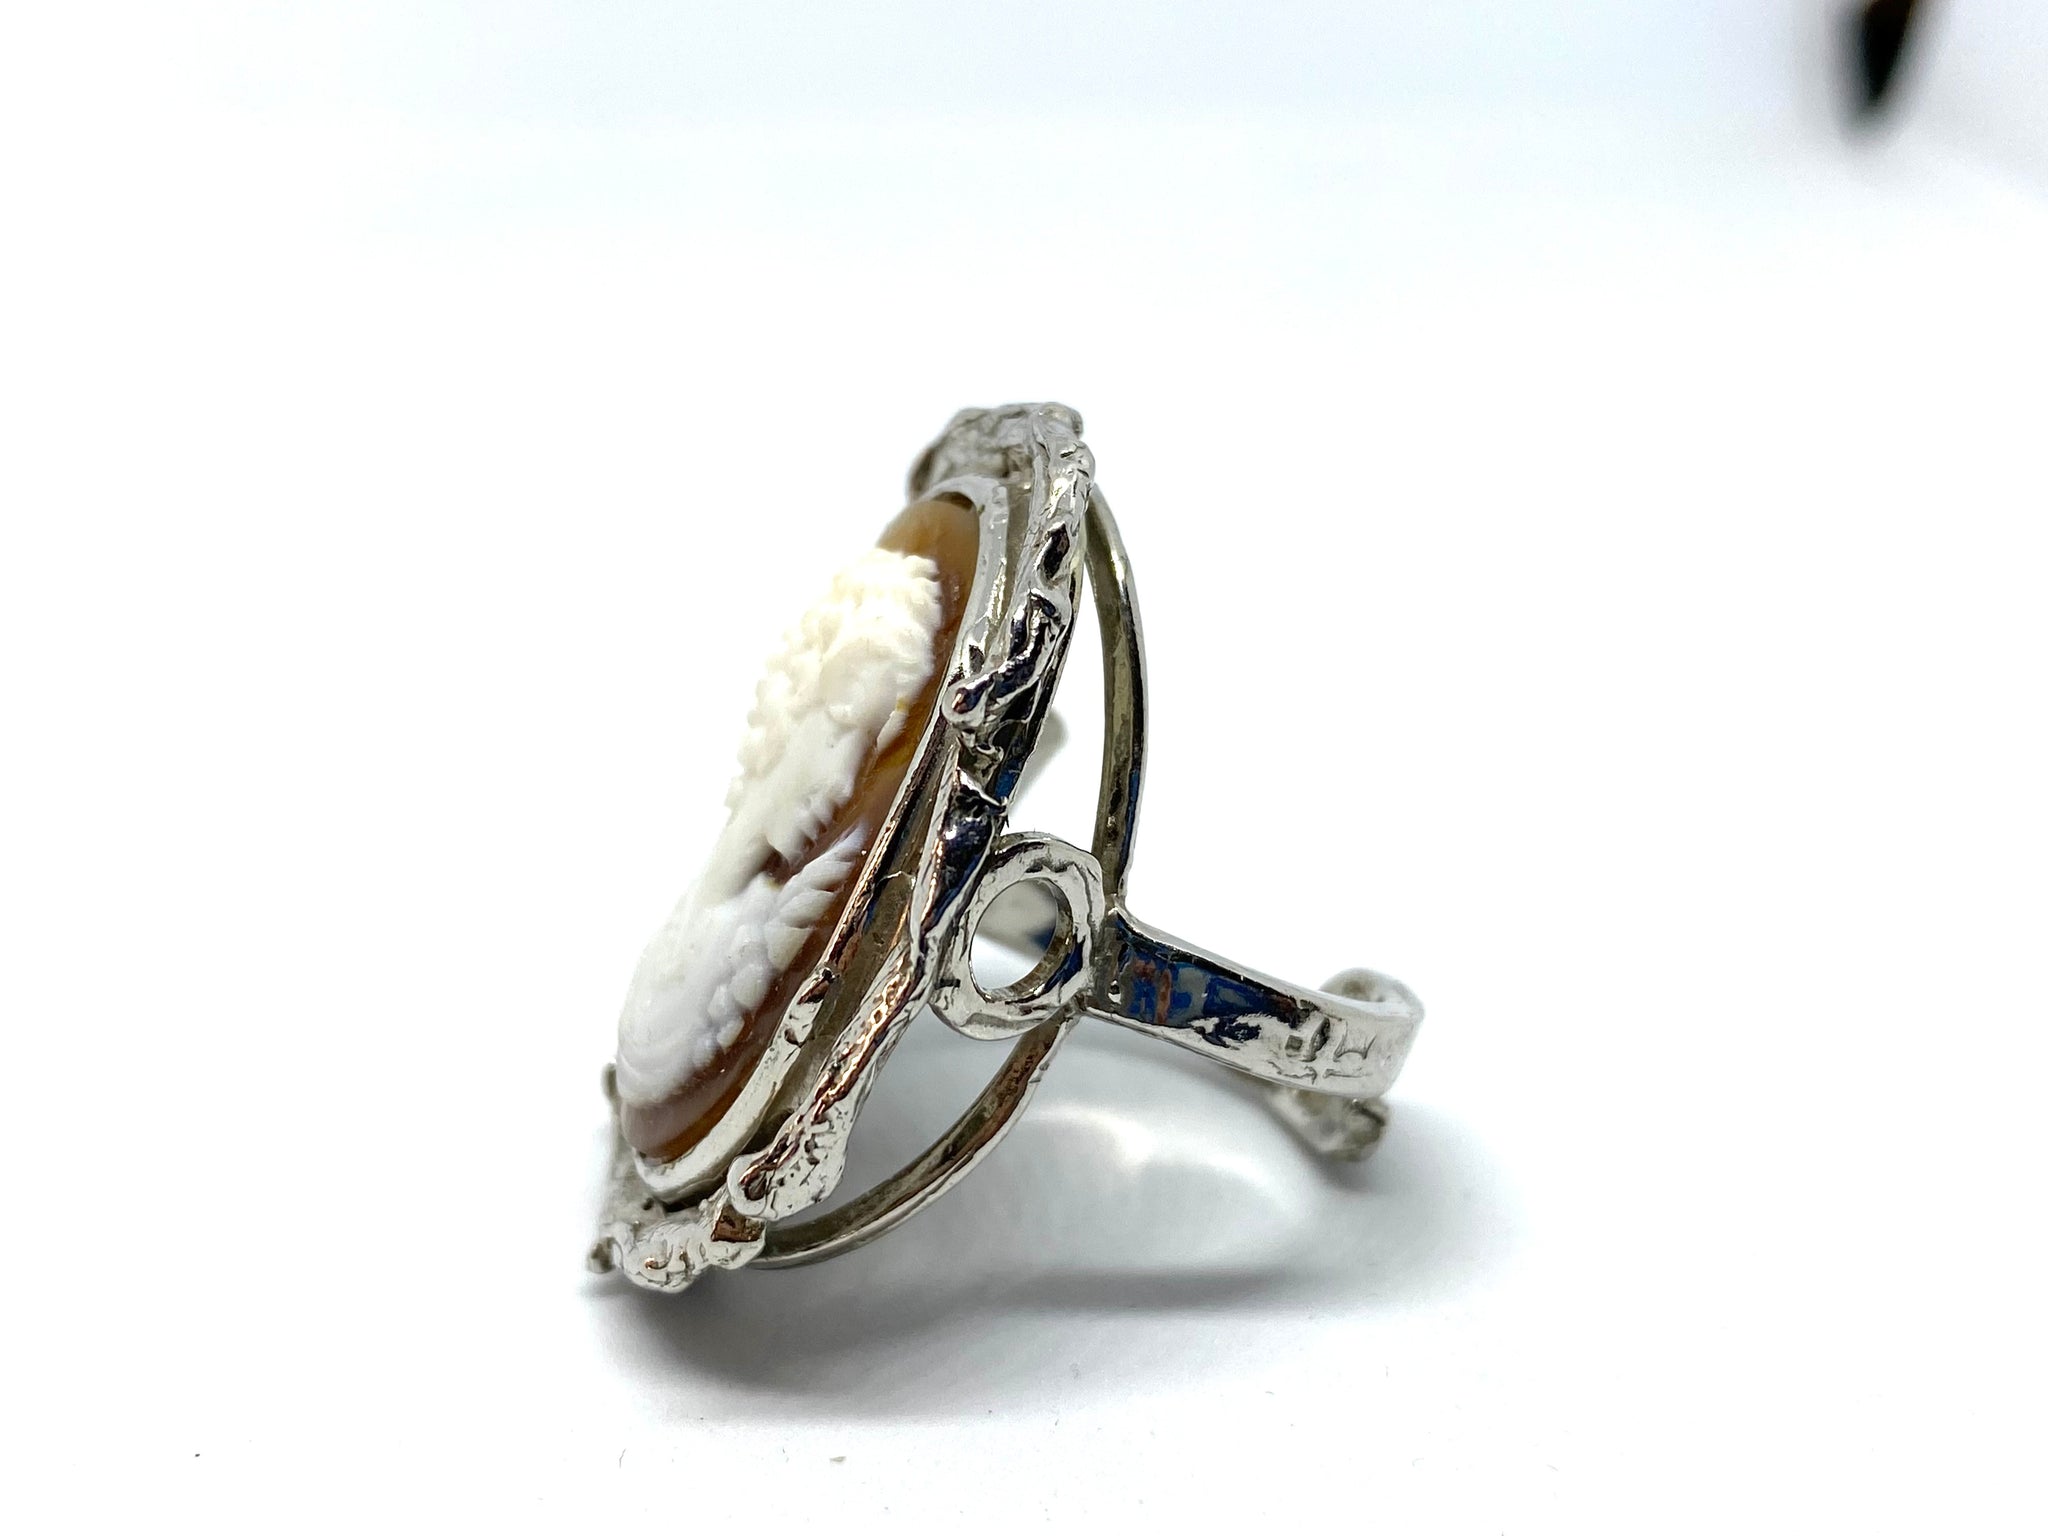 Buy Antique Sterling Silver Cameo Ring Online in India - Etsy